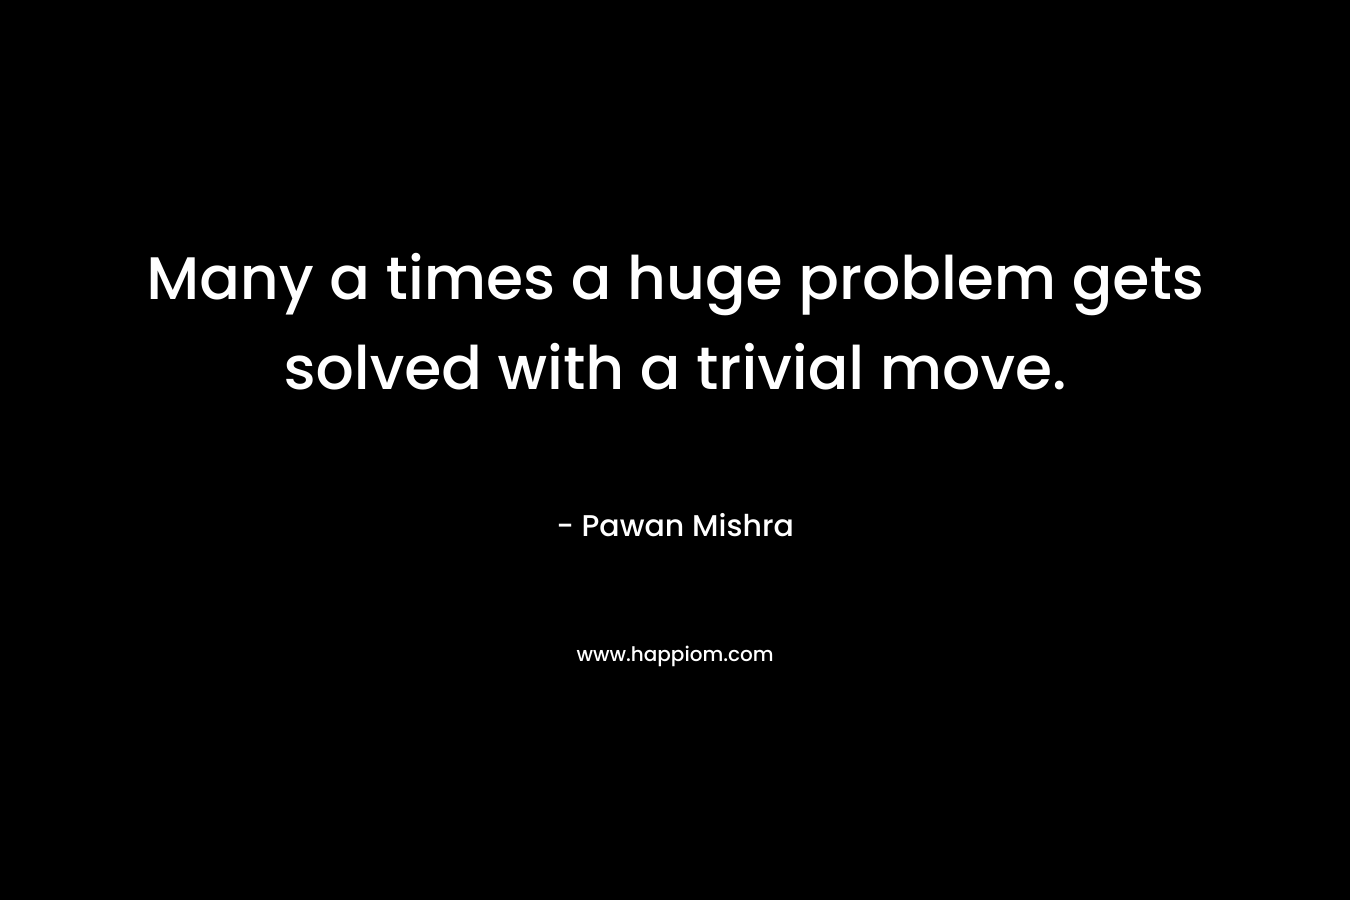 Many a times a huge problem gets solved with a trivial move.